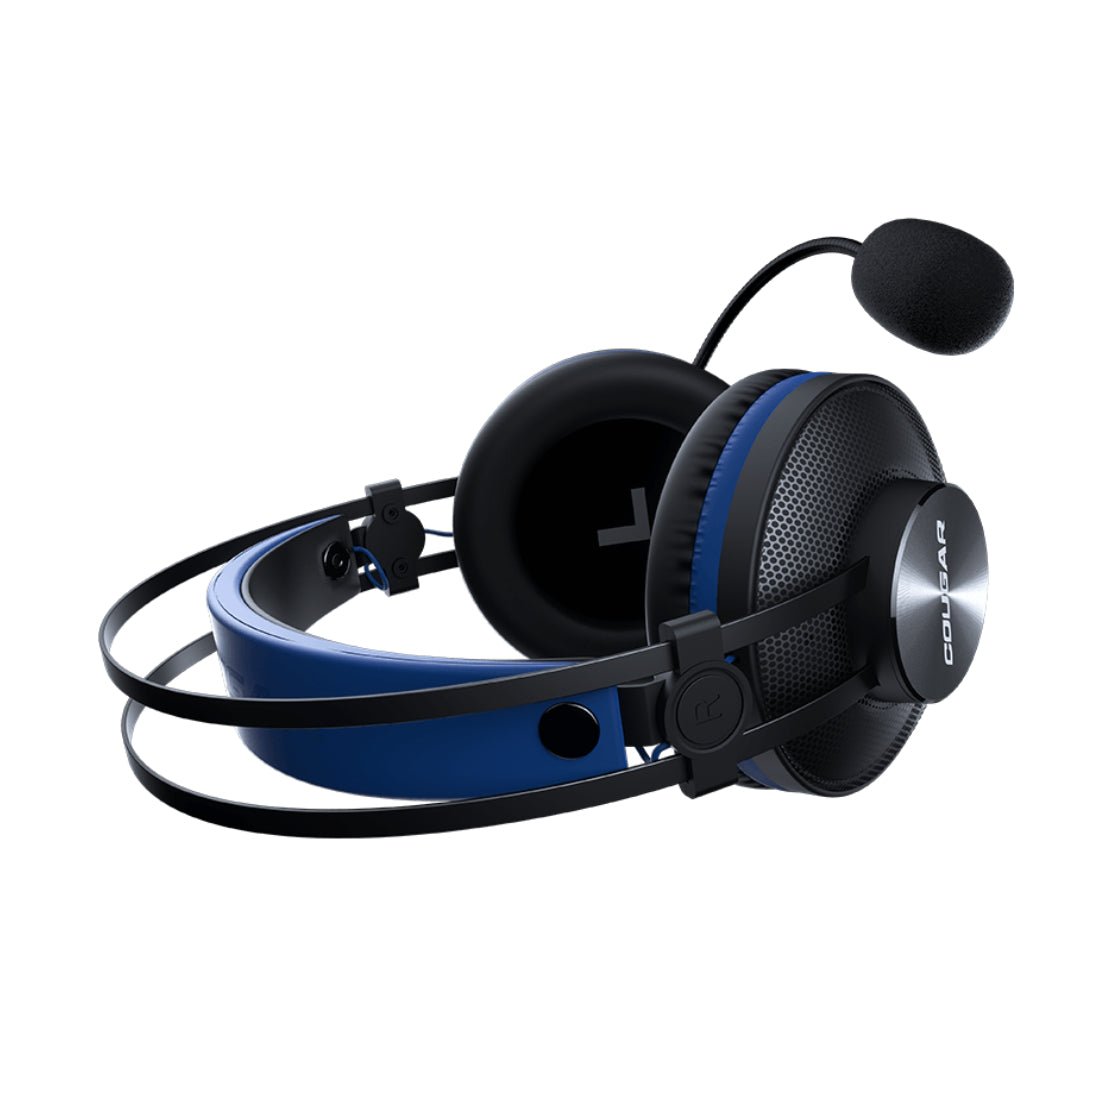 Cougar Immersa Essential Gaming Headset - Blue - سماعة - Store 974 | ستور ٩٧٤